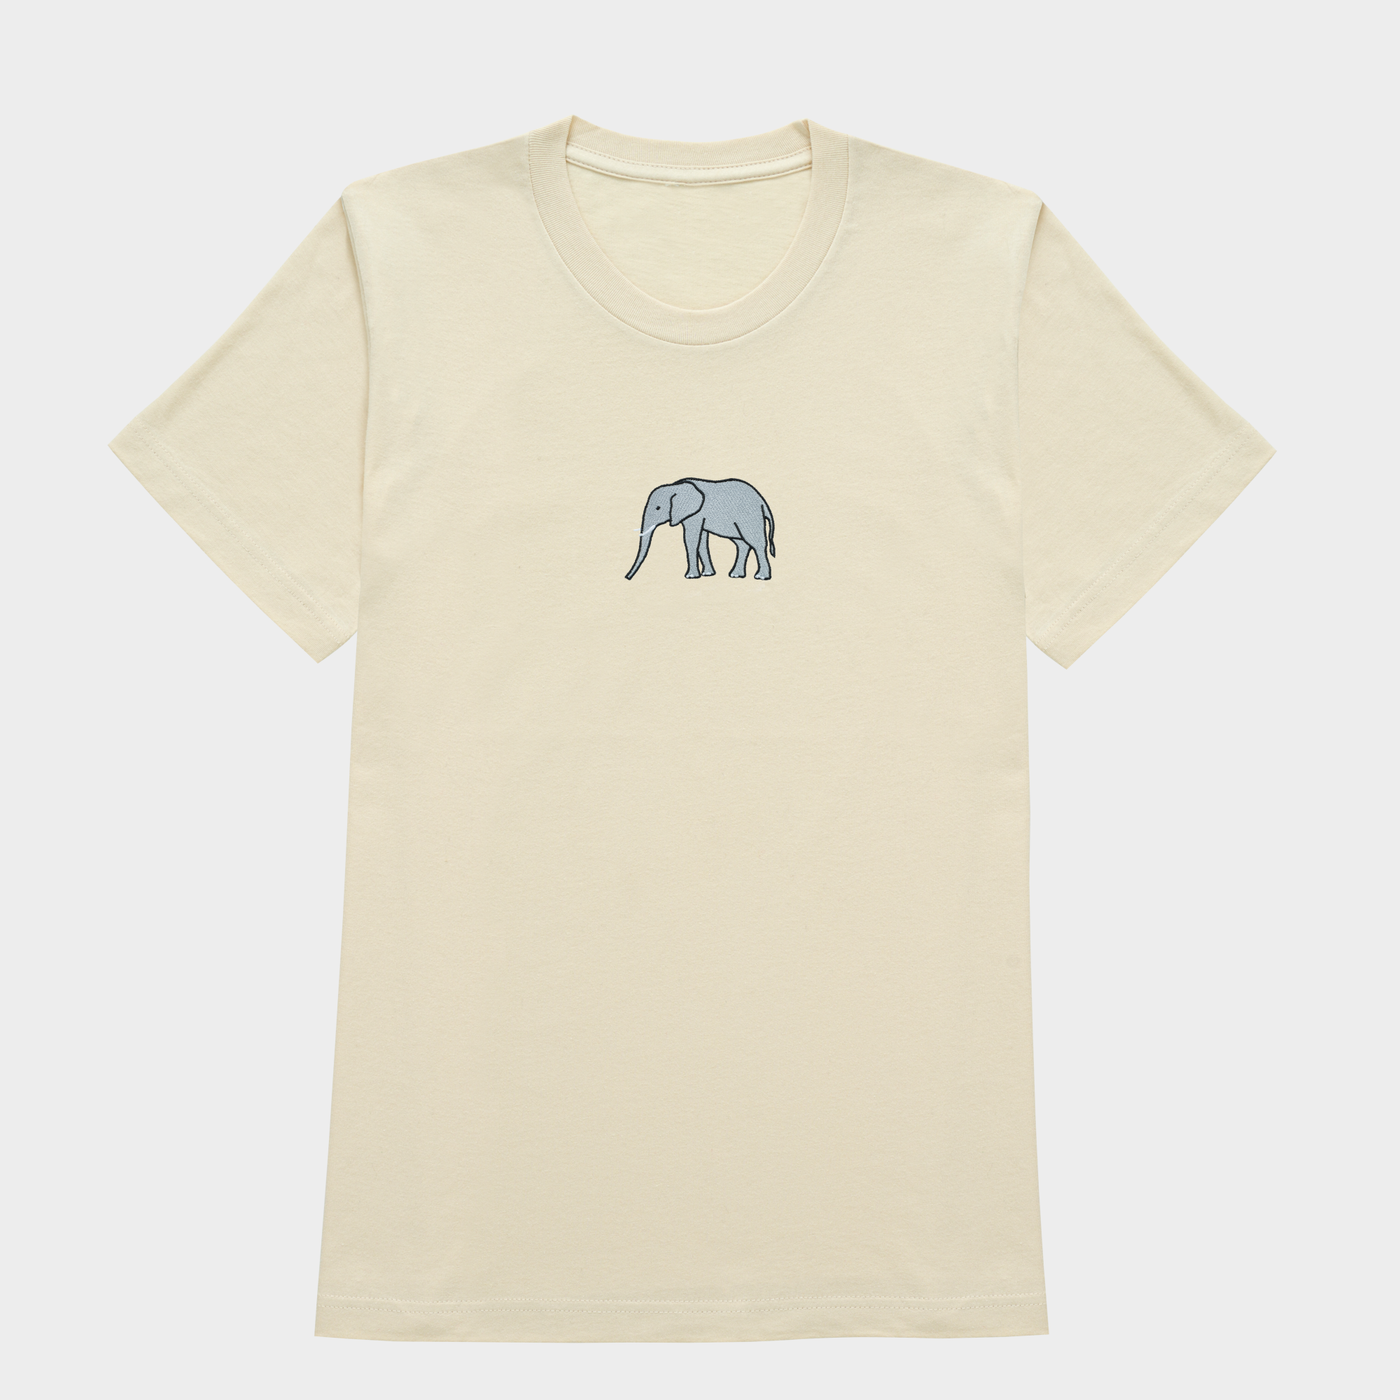 Bobby's Planet Women's Embroidered Elephant T-Shirt from African Animals Collection in Soft Cream Color#color_soft-cream